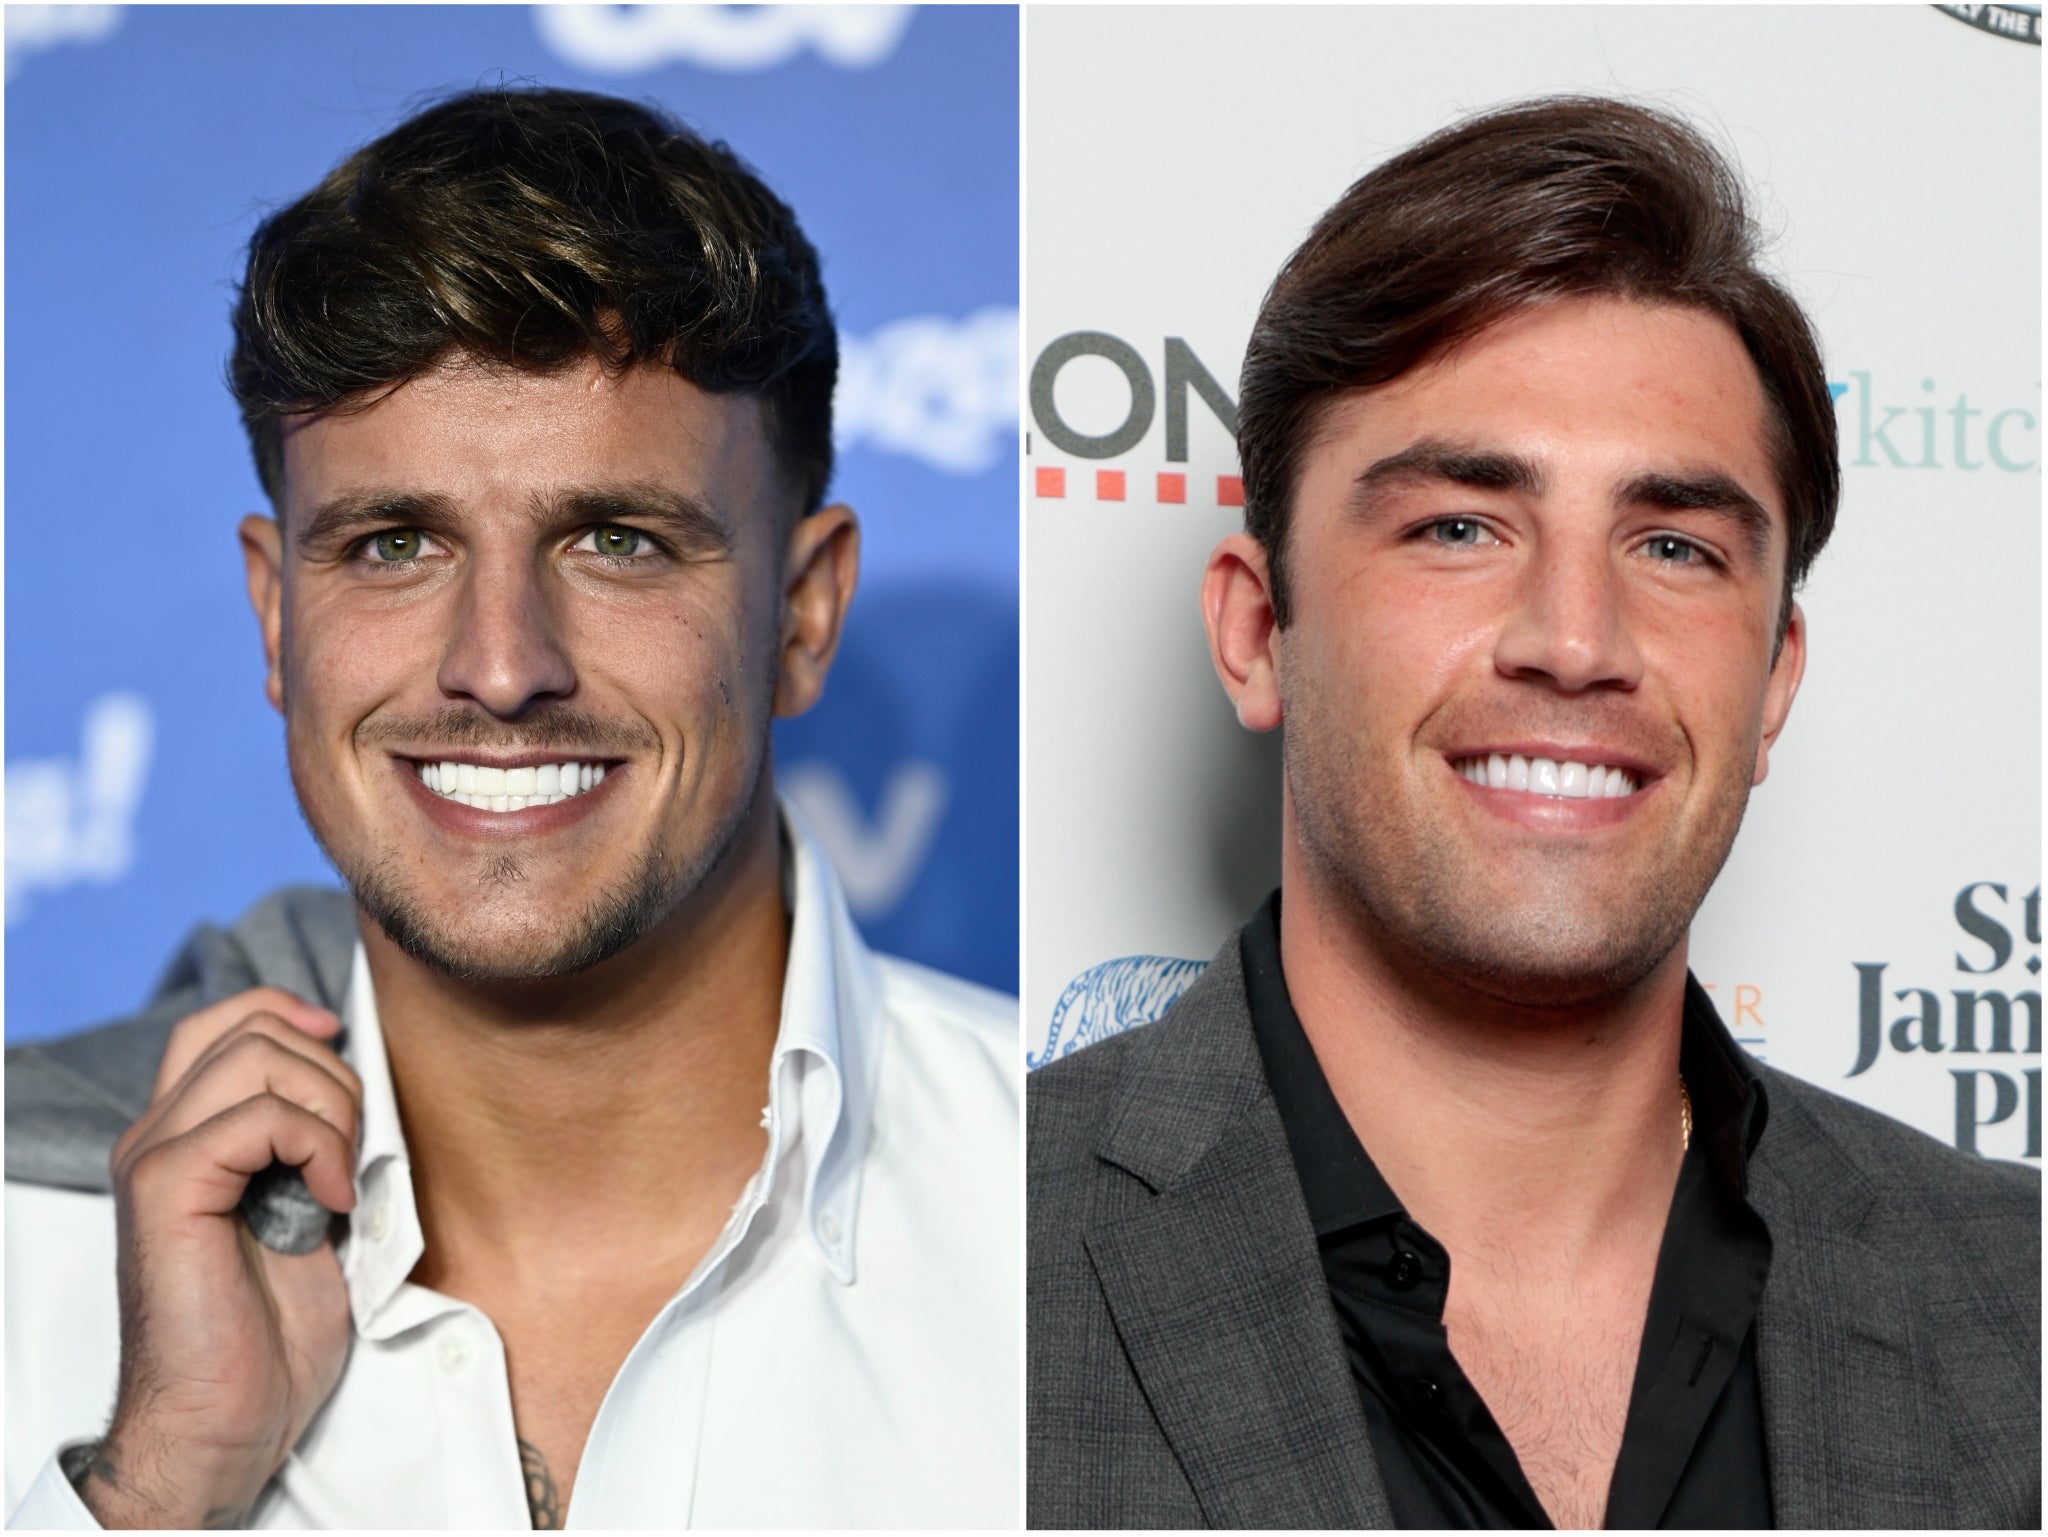 ‘Love Island’ stars Luca Bish and Jack Fincham have both publicly confirmed they visited Turkey for dental work